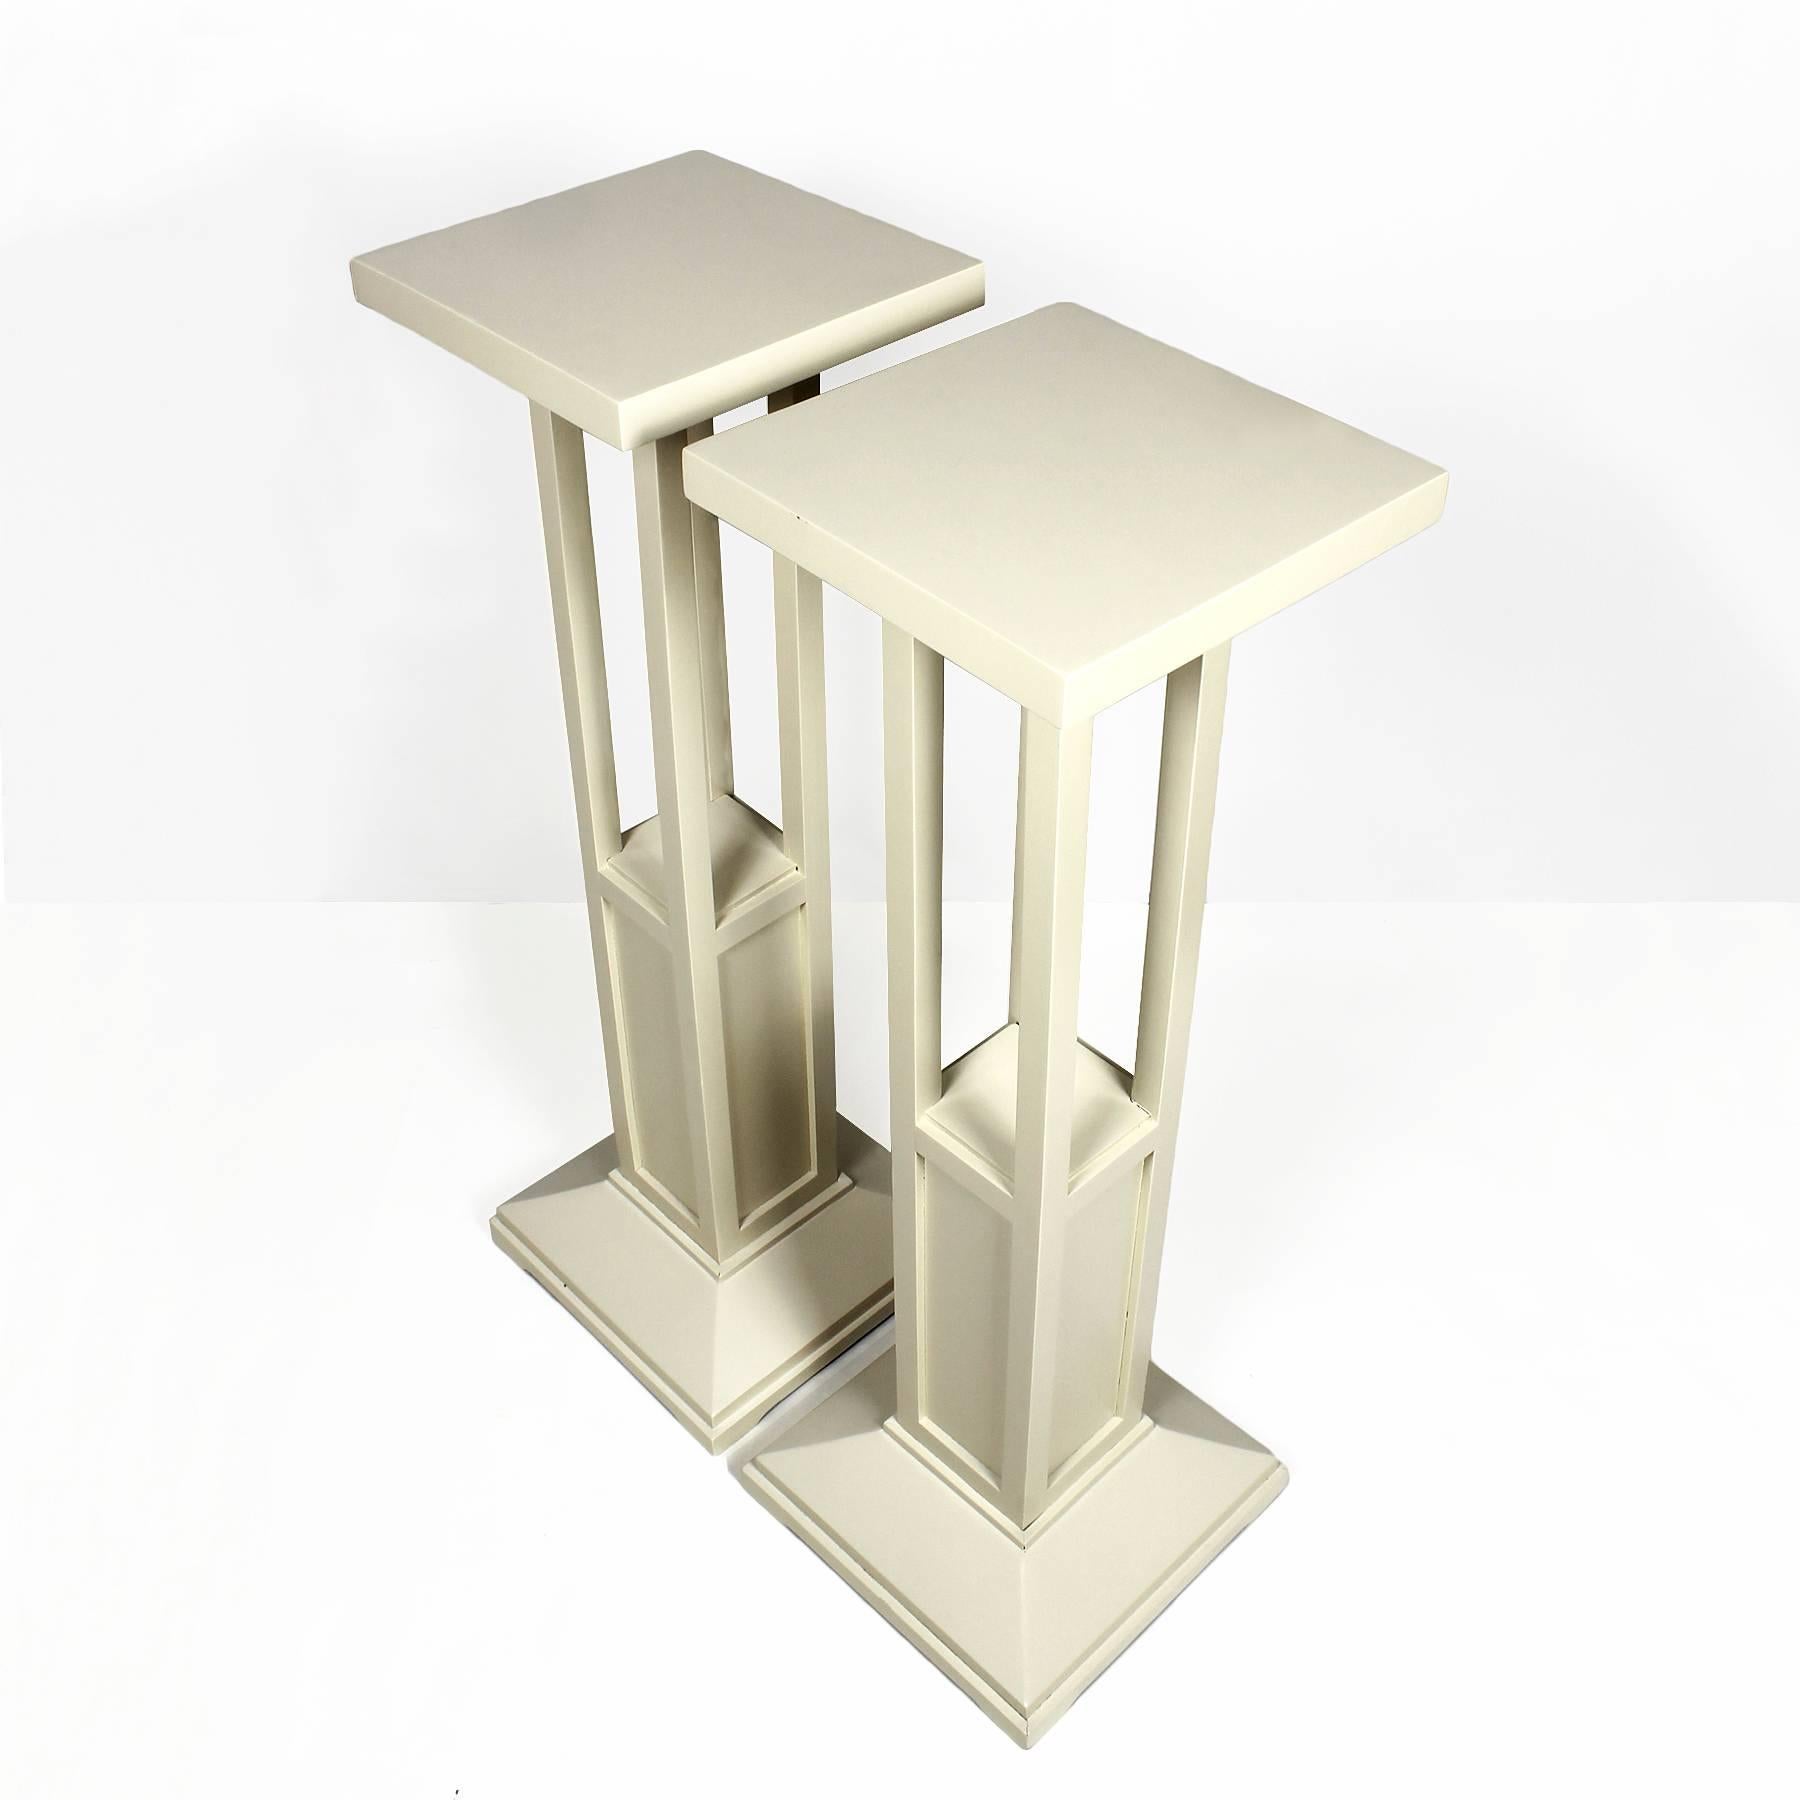 French 1910s Pair of Cubist Art Nouveau Stands, Ivory lacquered Oak - France For Sale